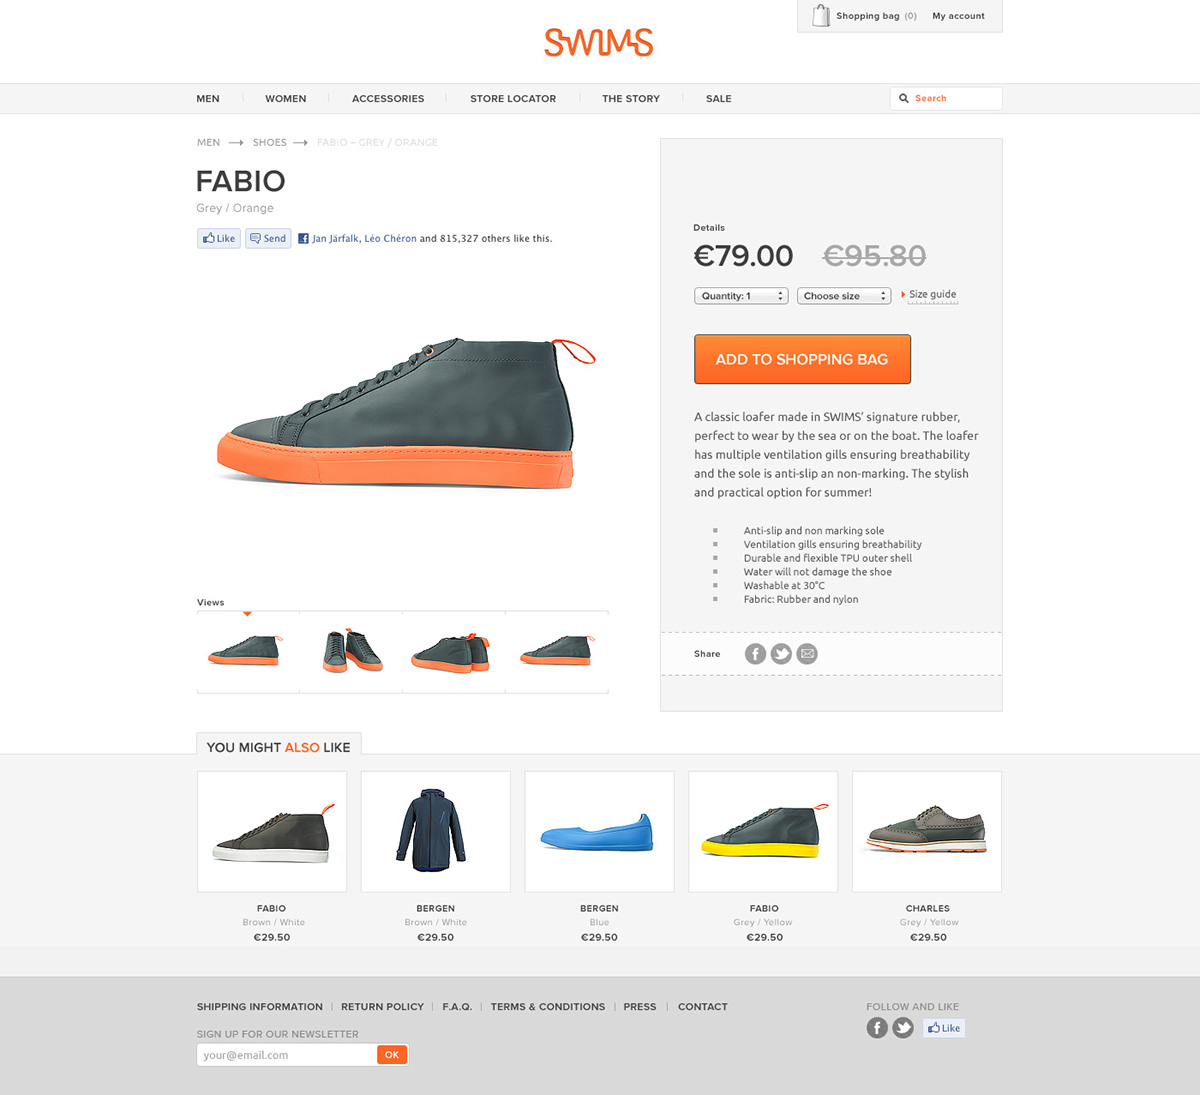 swims norway web shop e-commerce Layout grid brand Clothing shoes caloshes Outerwear jackets Shopping weather